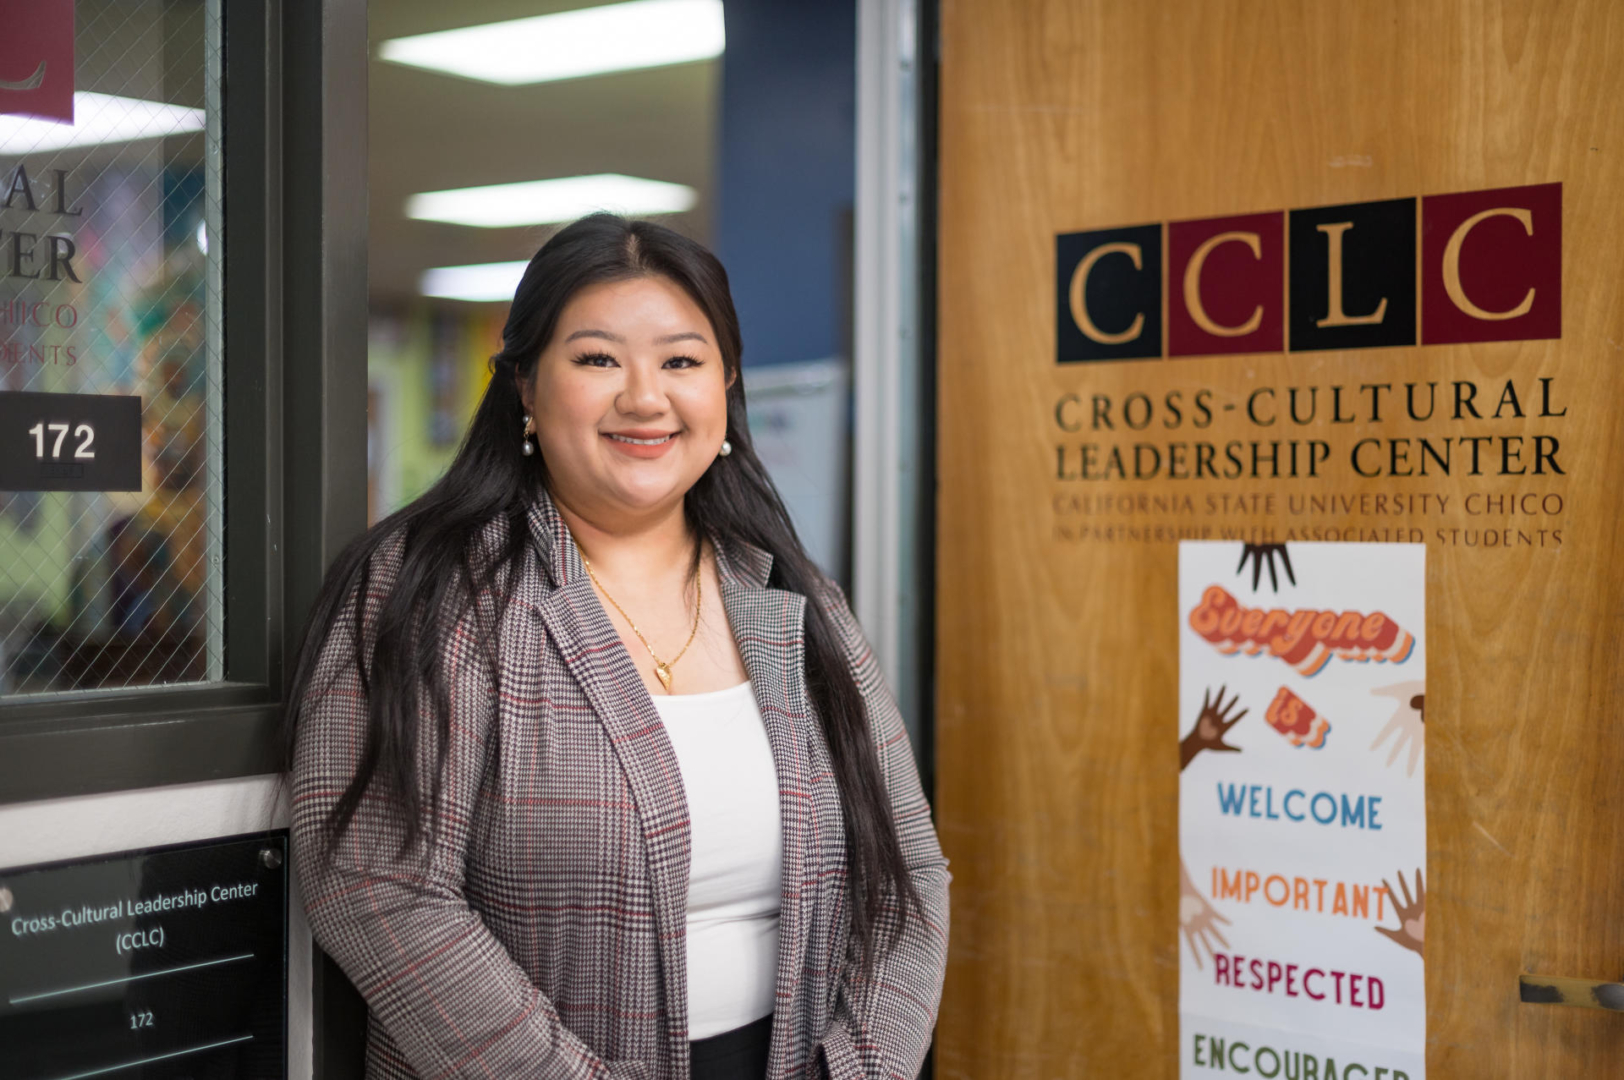 Selena Thao poses and smiles standing outside the door of the Cross-Cultural Leadership Center